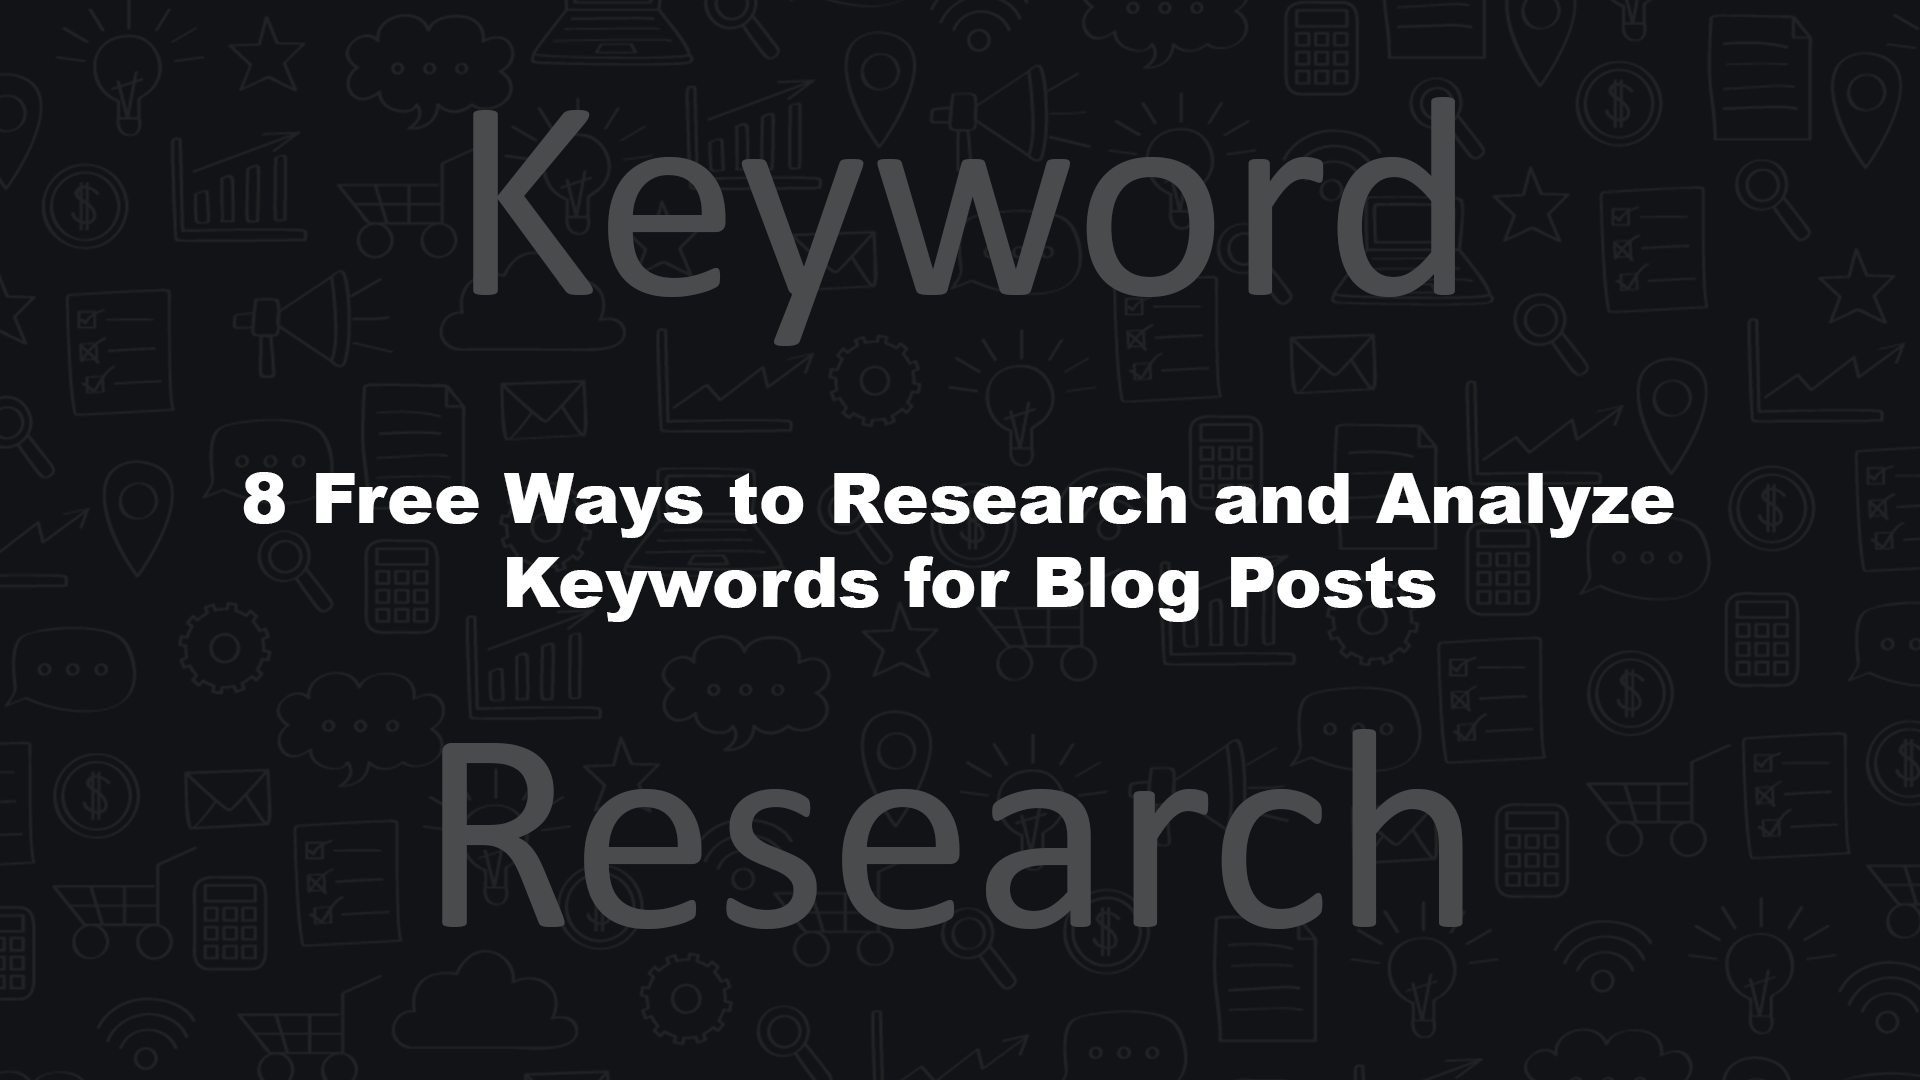 8 Free Ways to Research and Analyze Keywords for Blog Posts